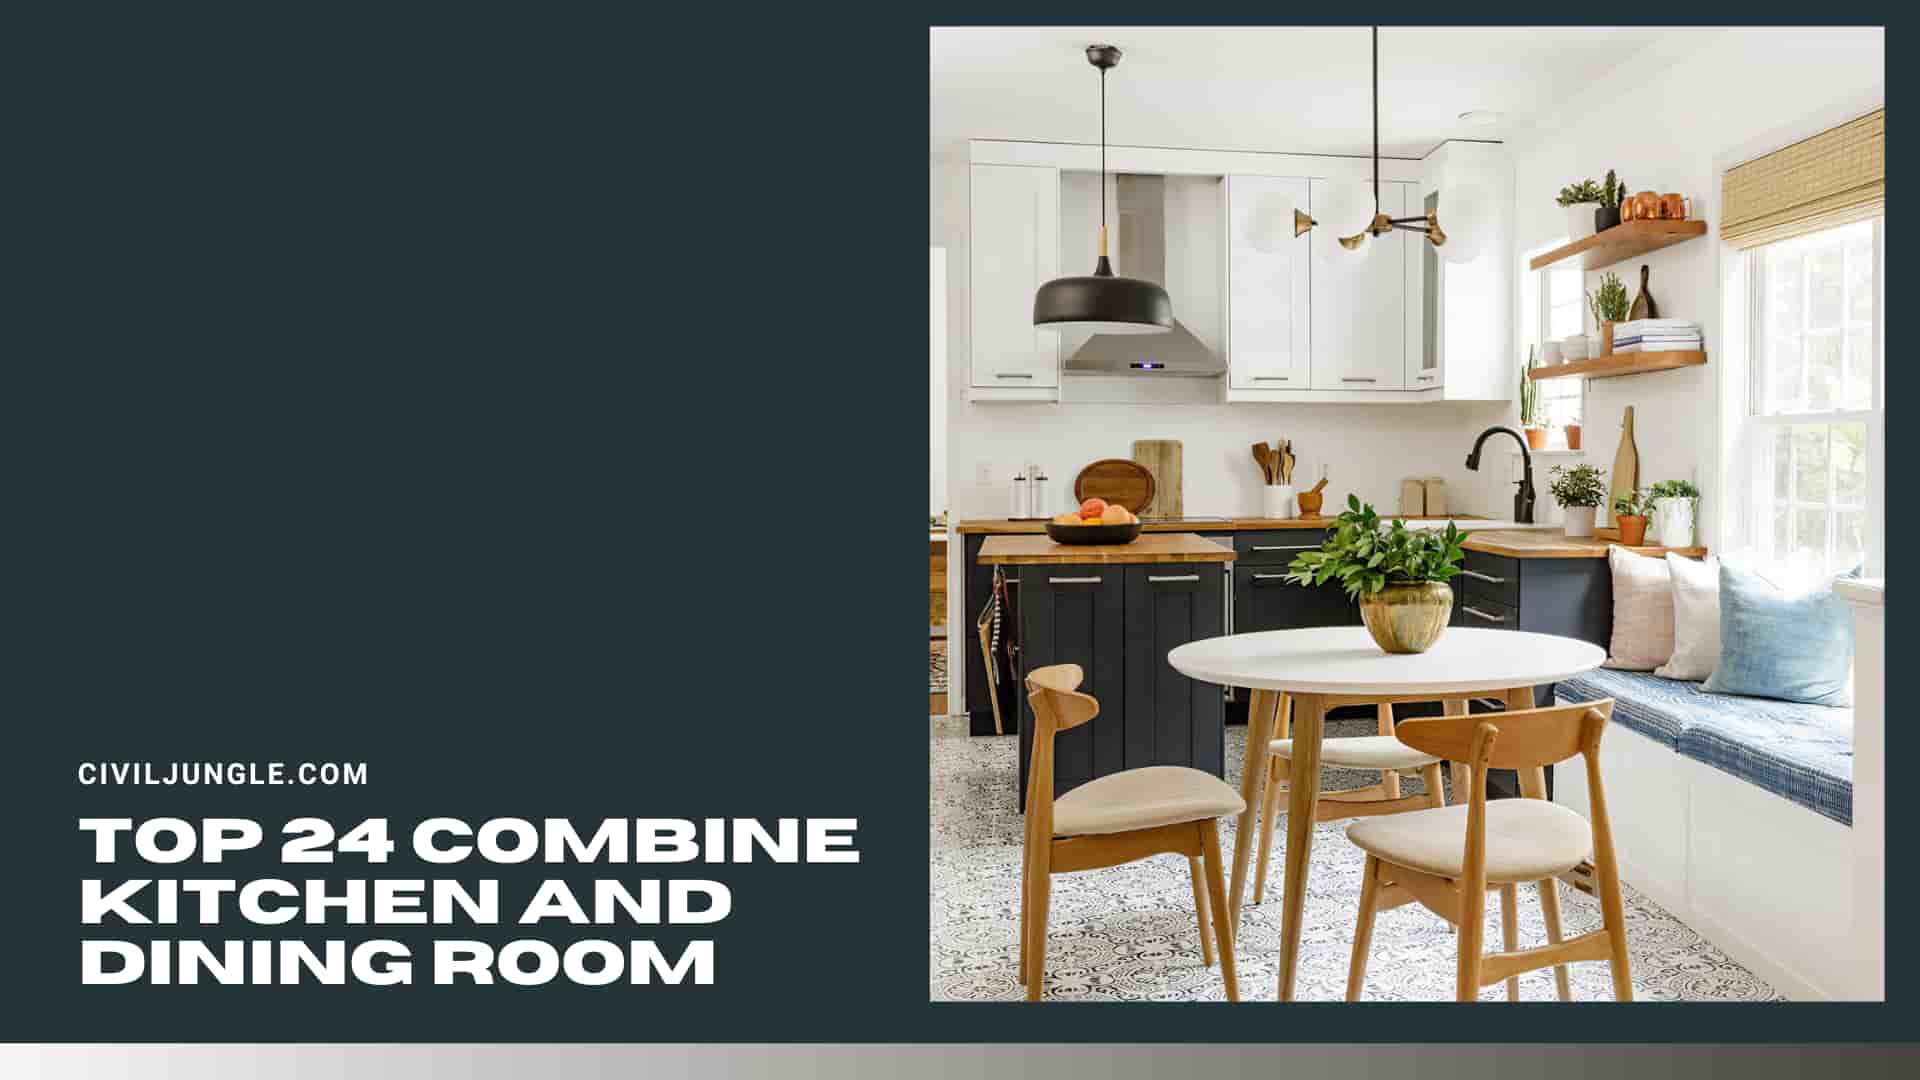 Top 24 Combine Kitchen and Dining Room